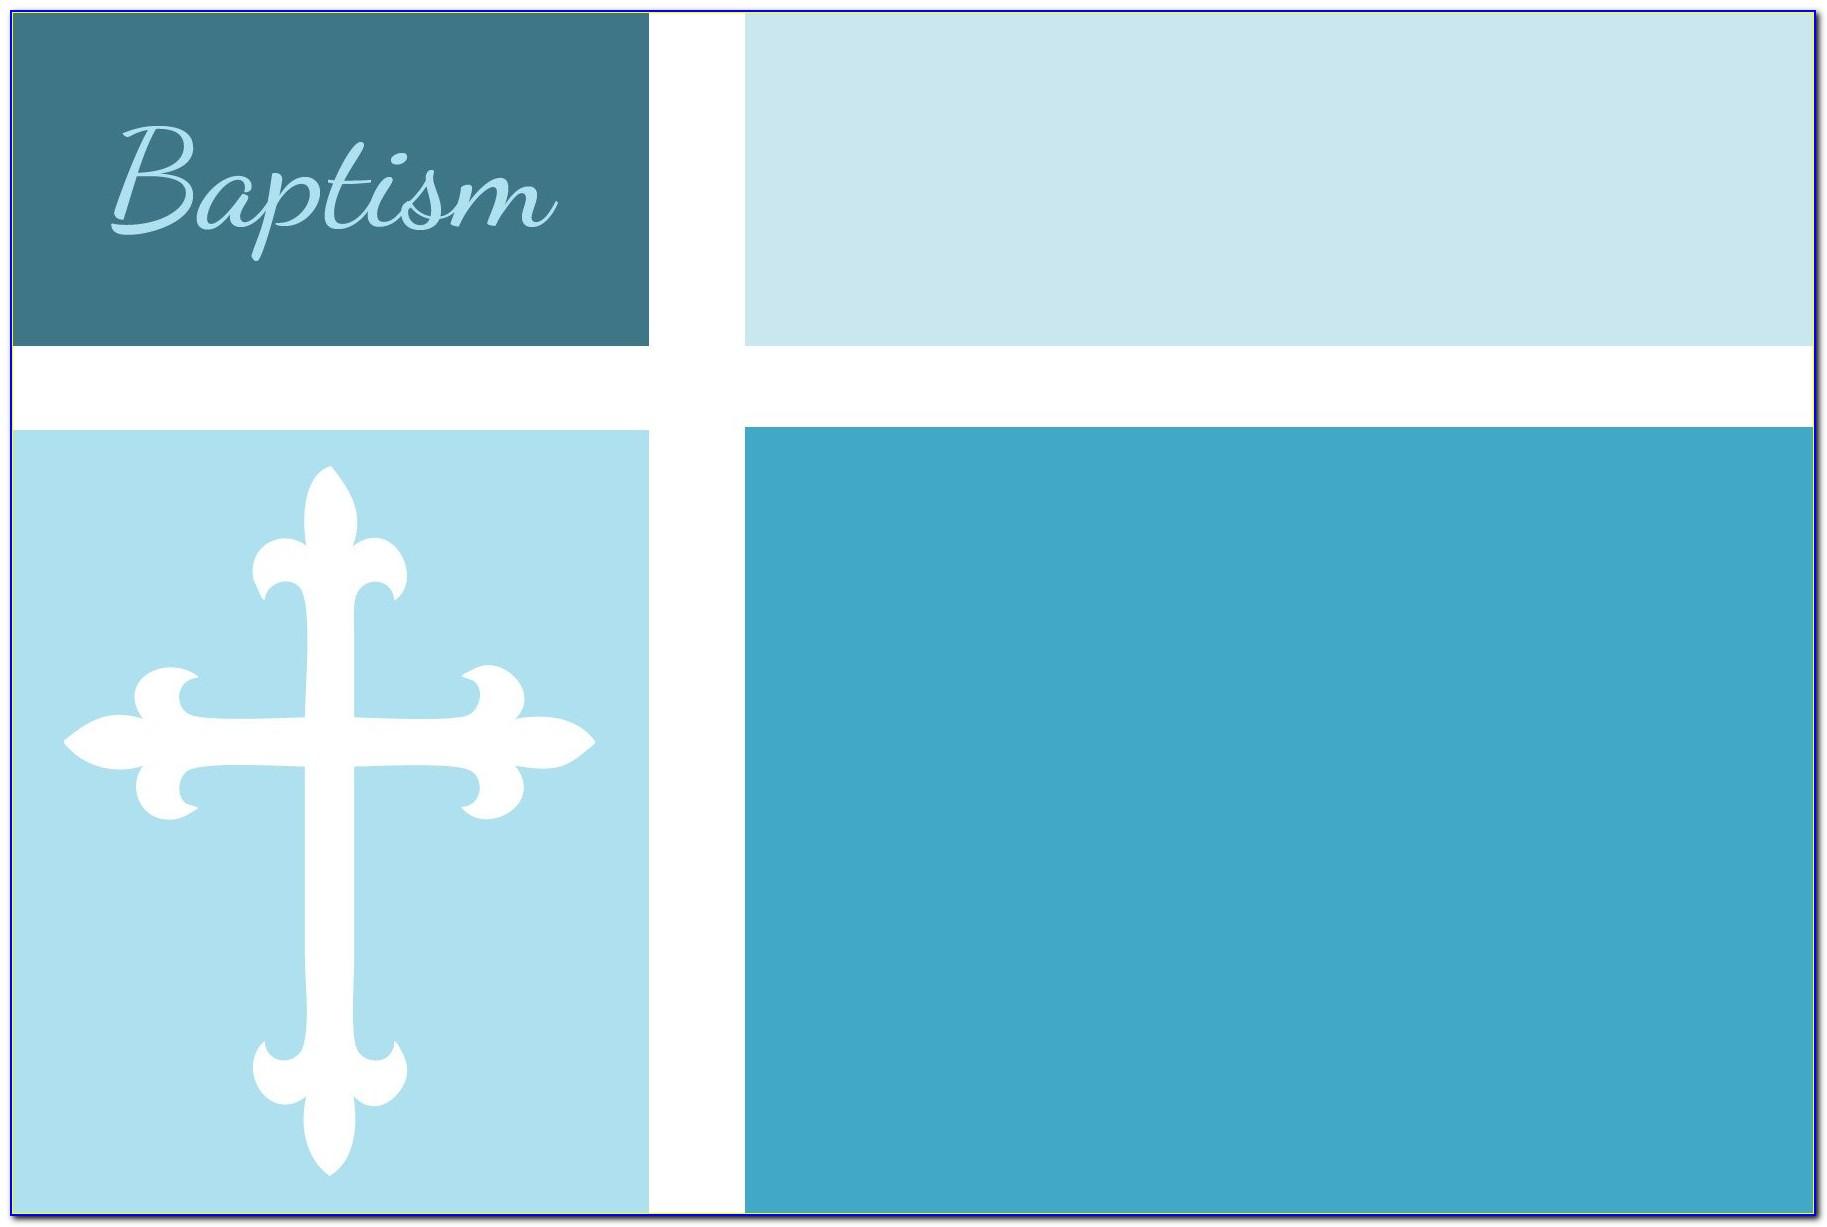 Word Templates For Baptism Invitations